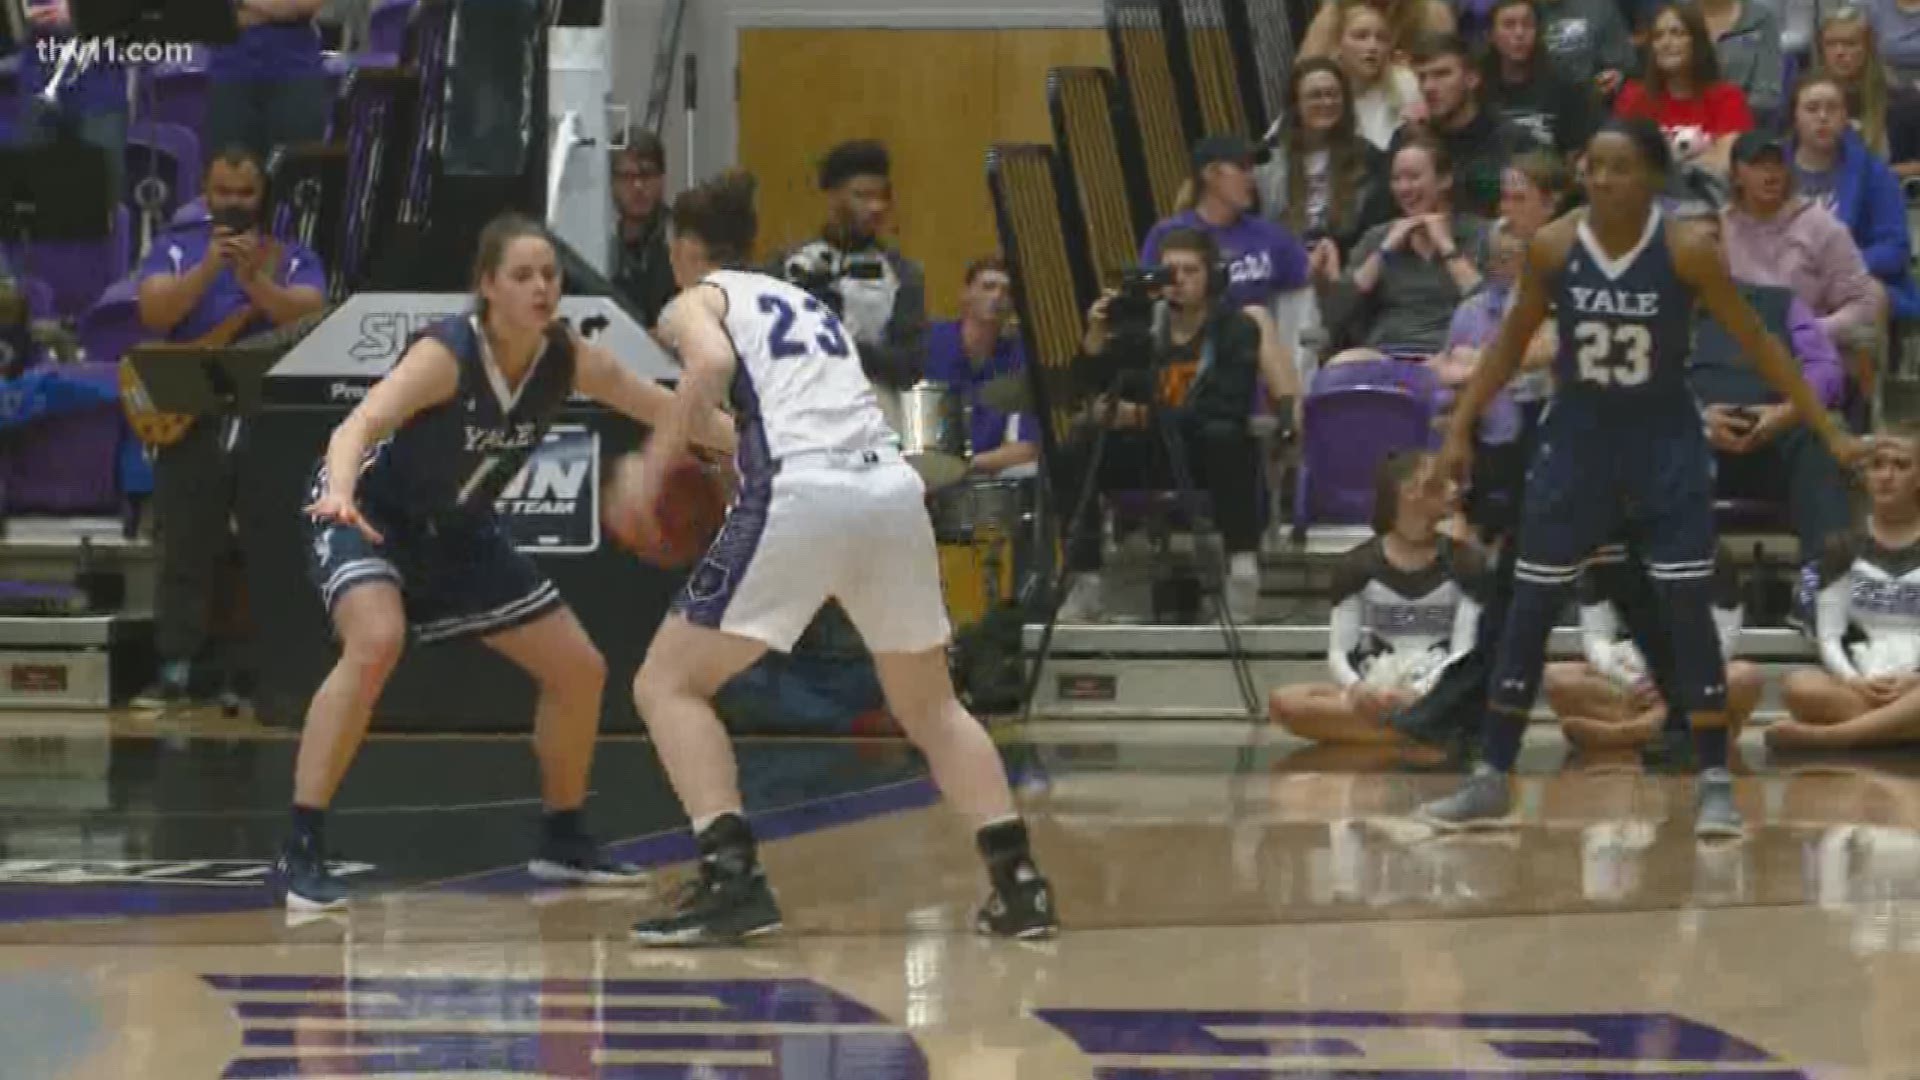 UCA falls to Yale in the WBI Championship